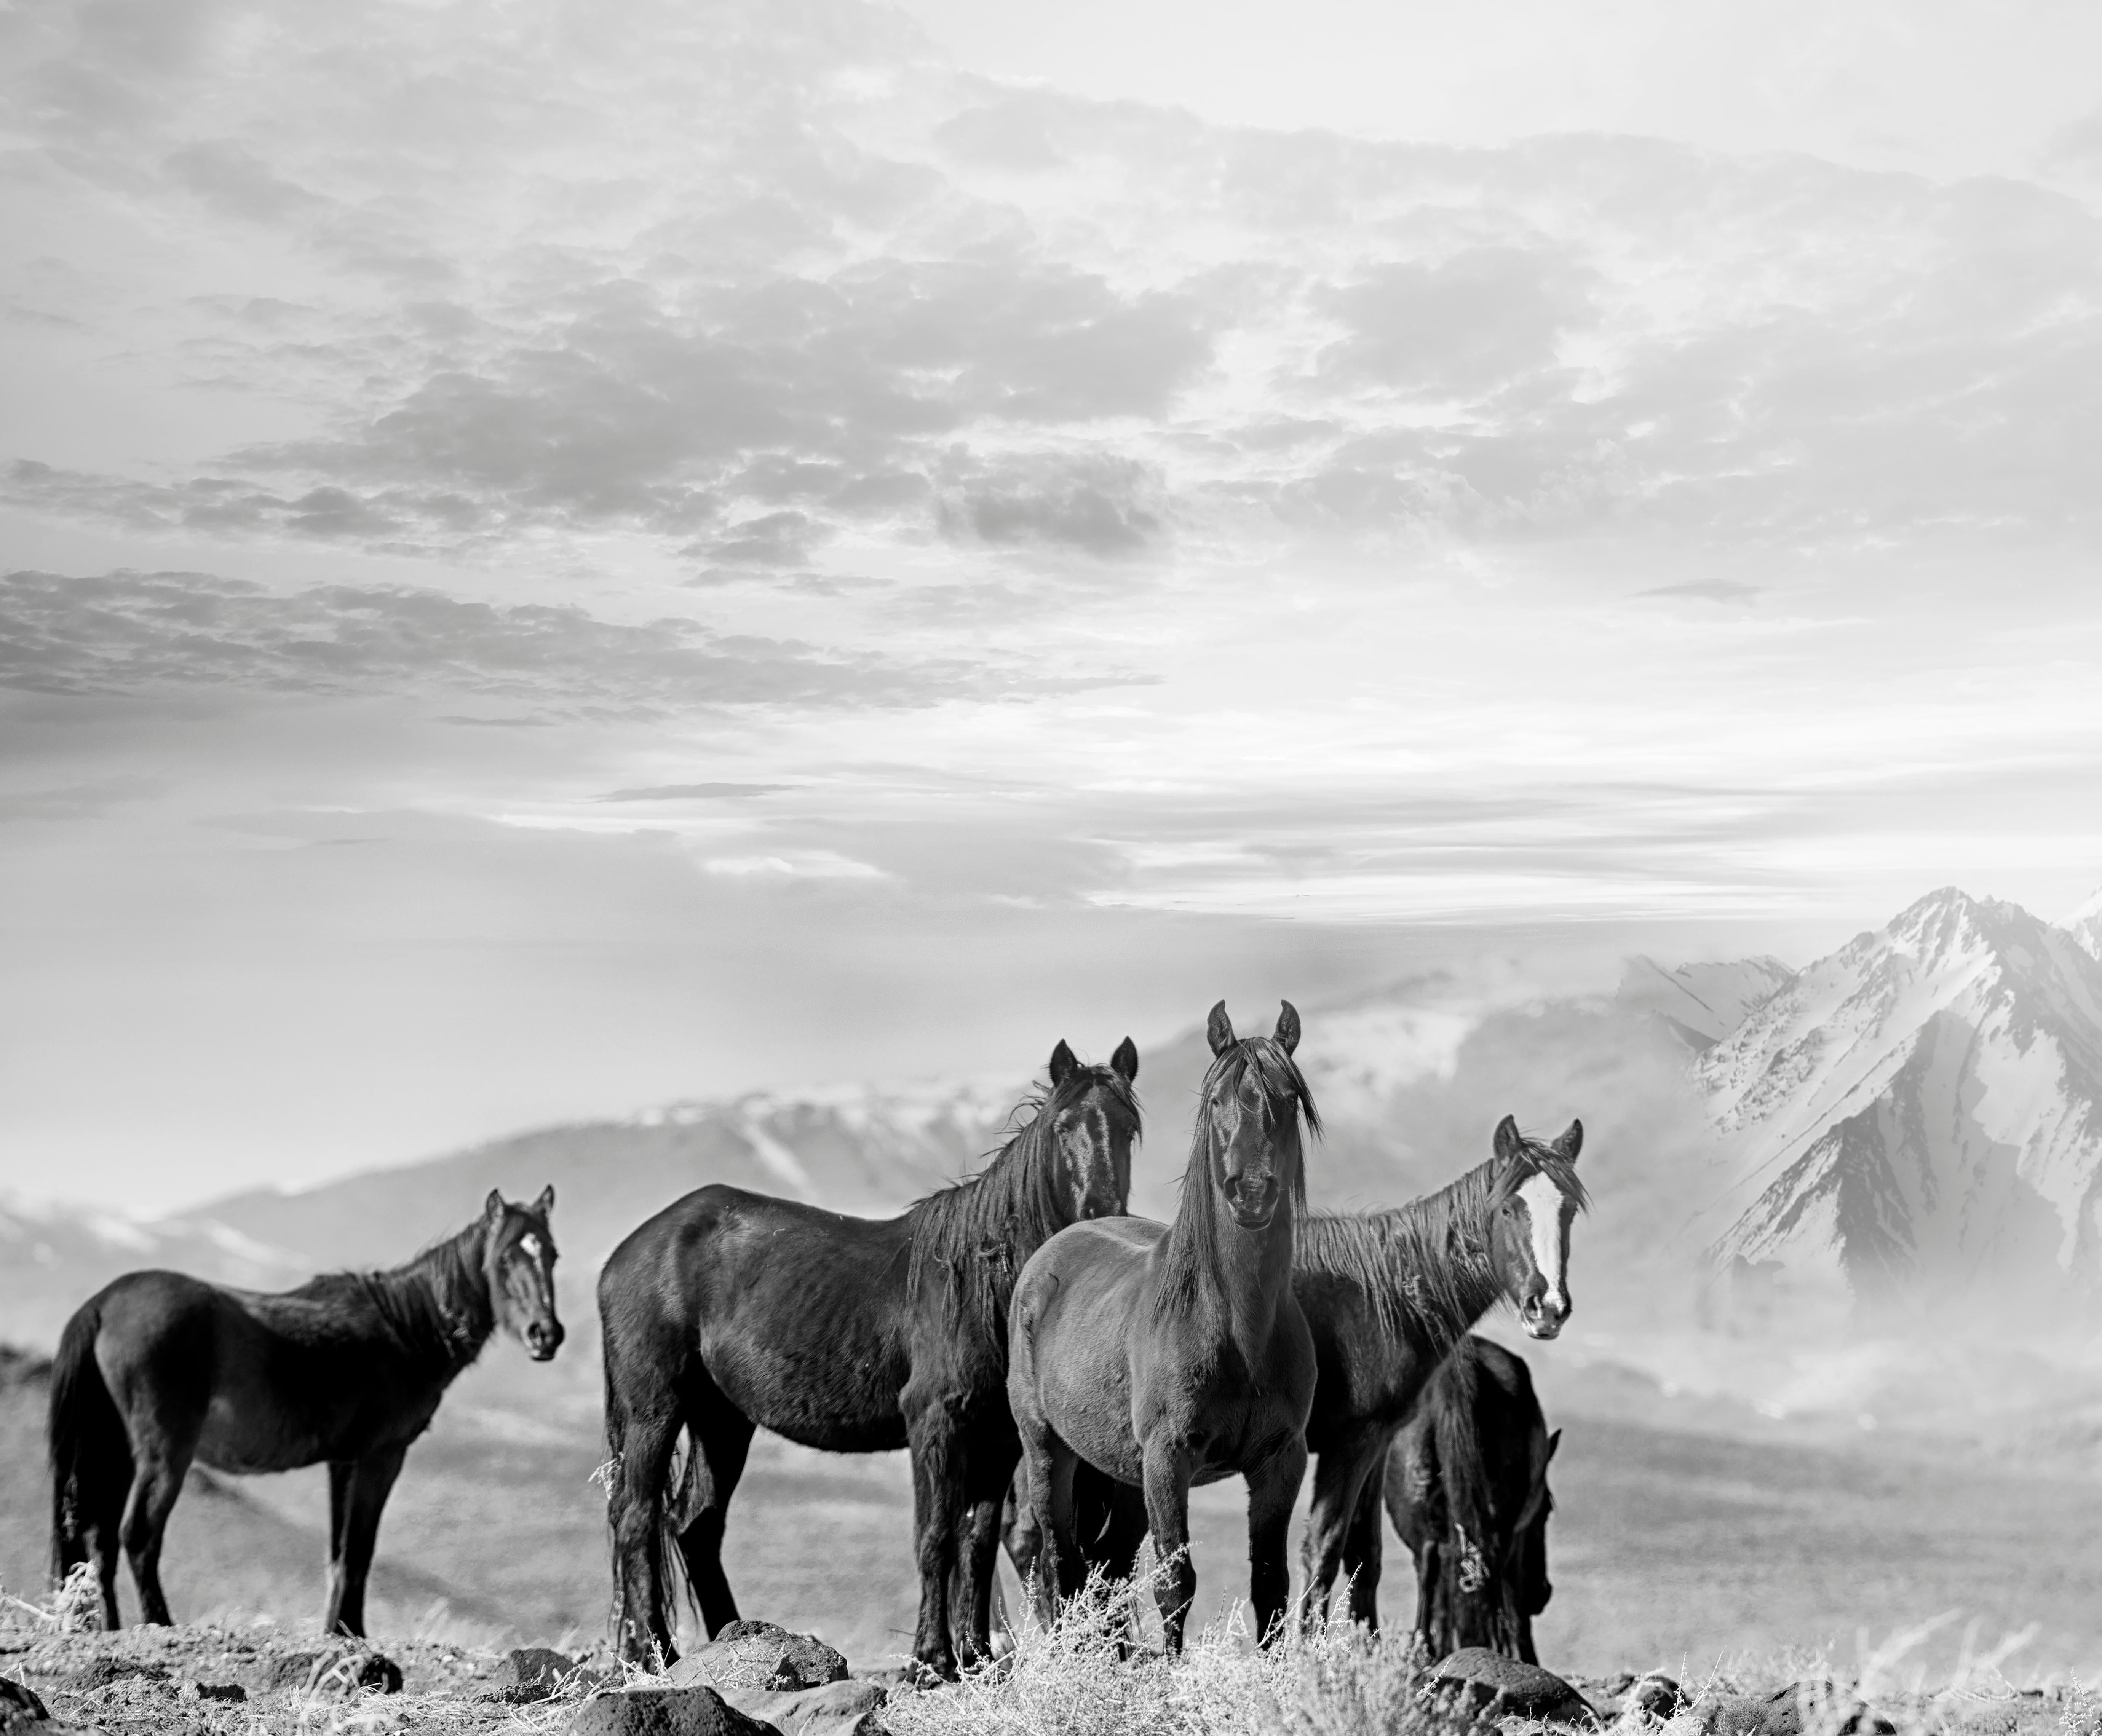 Shane Russeck Landscape Photograph - High Sierra Mustangs - 20x30 Black and White Photography of Wild Horses 